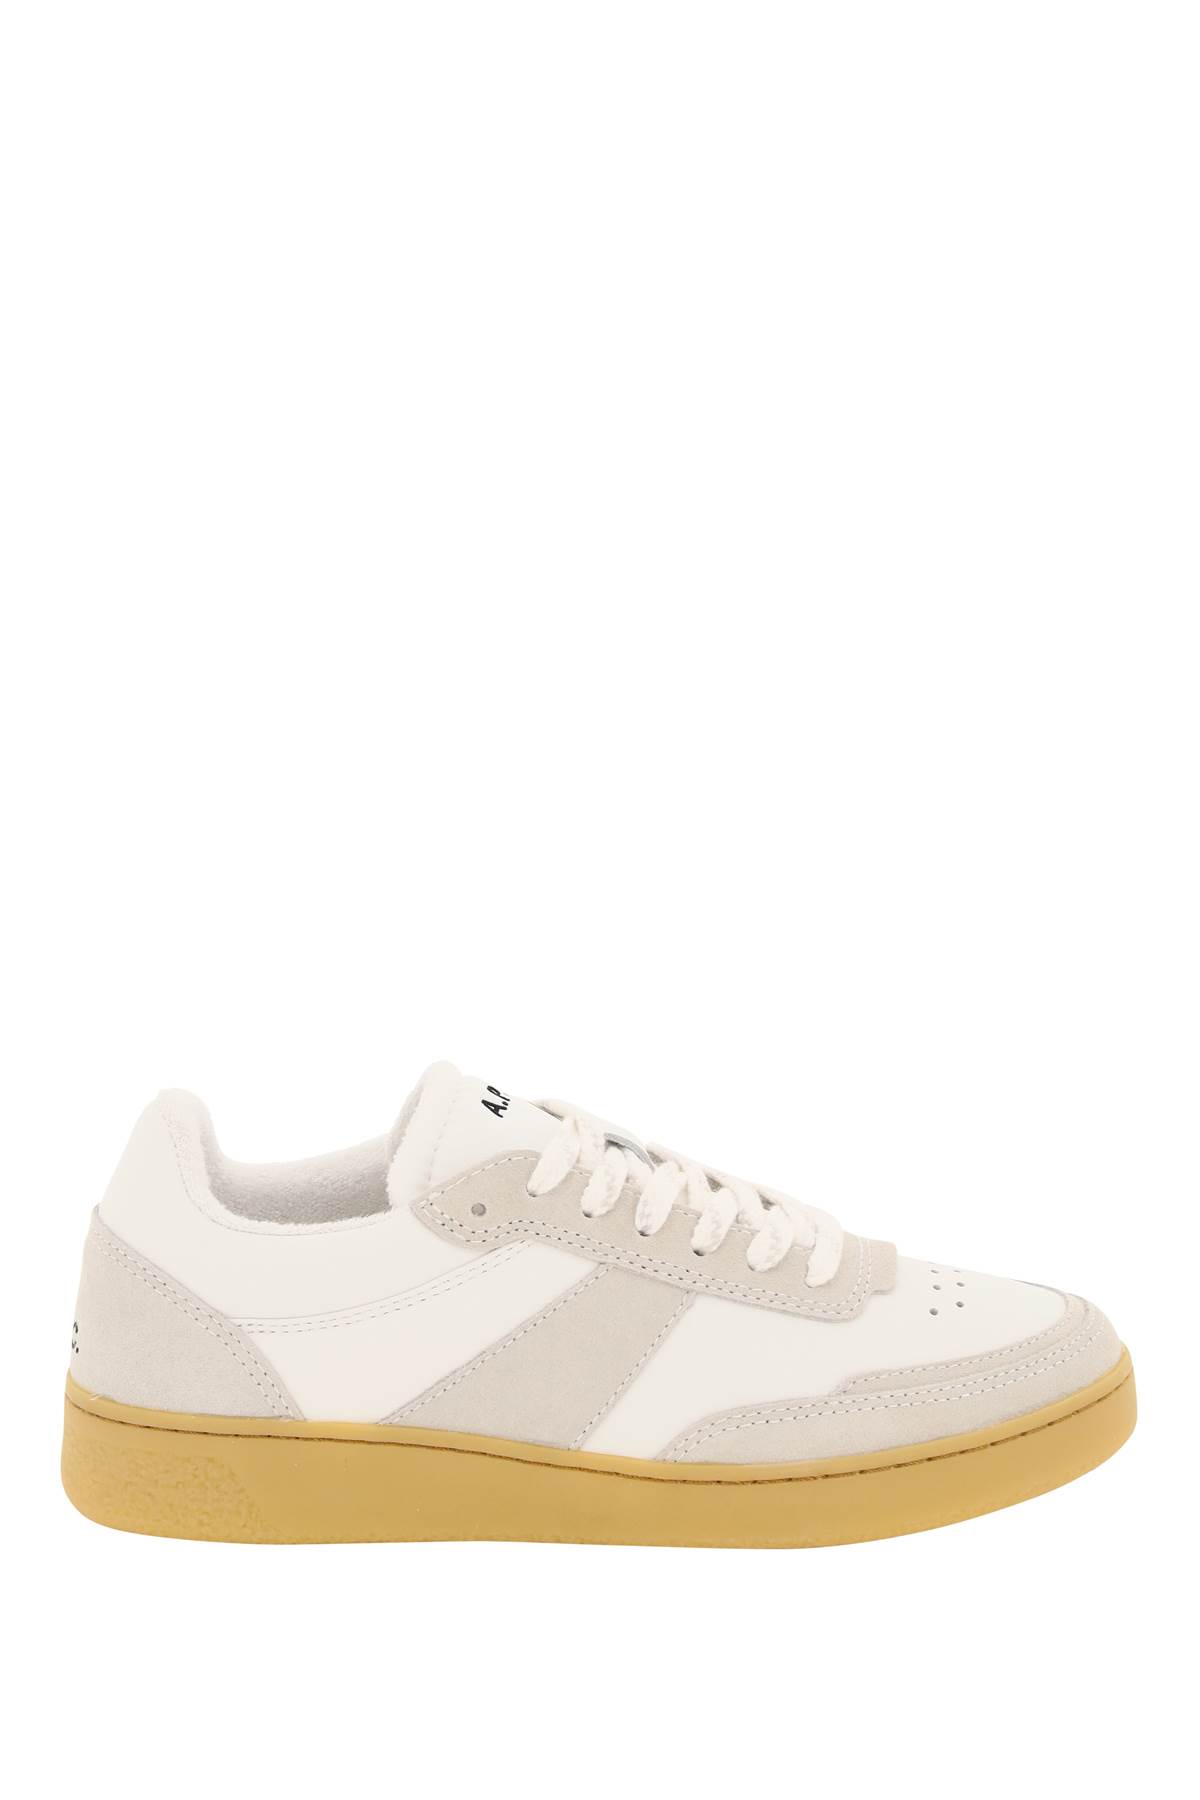 A.P.C. plain Leather Sneakers